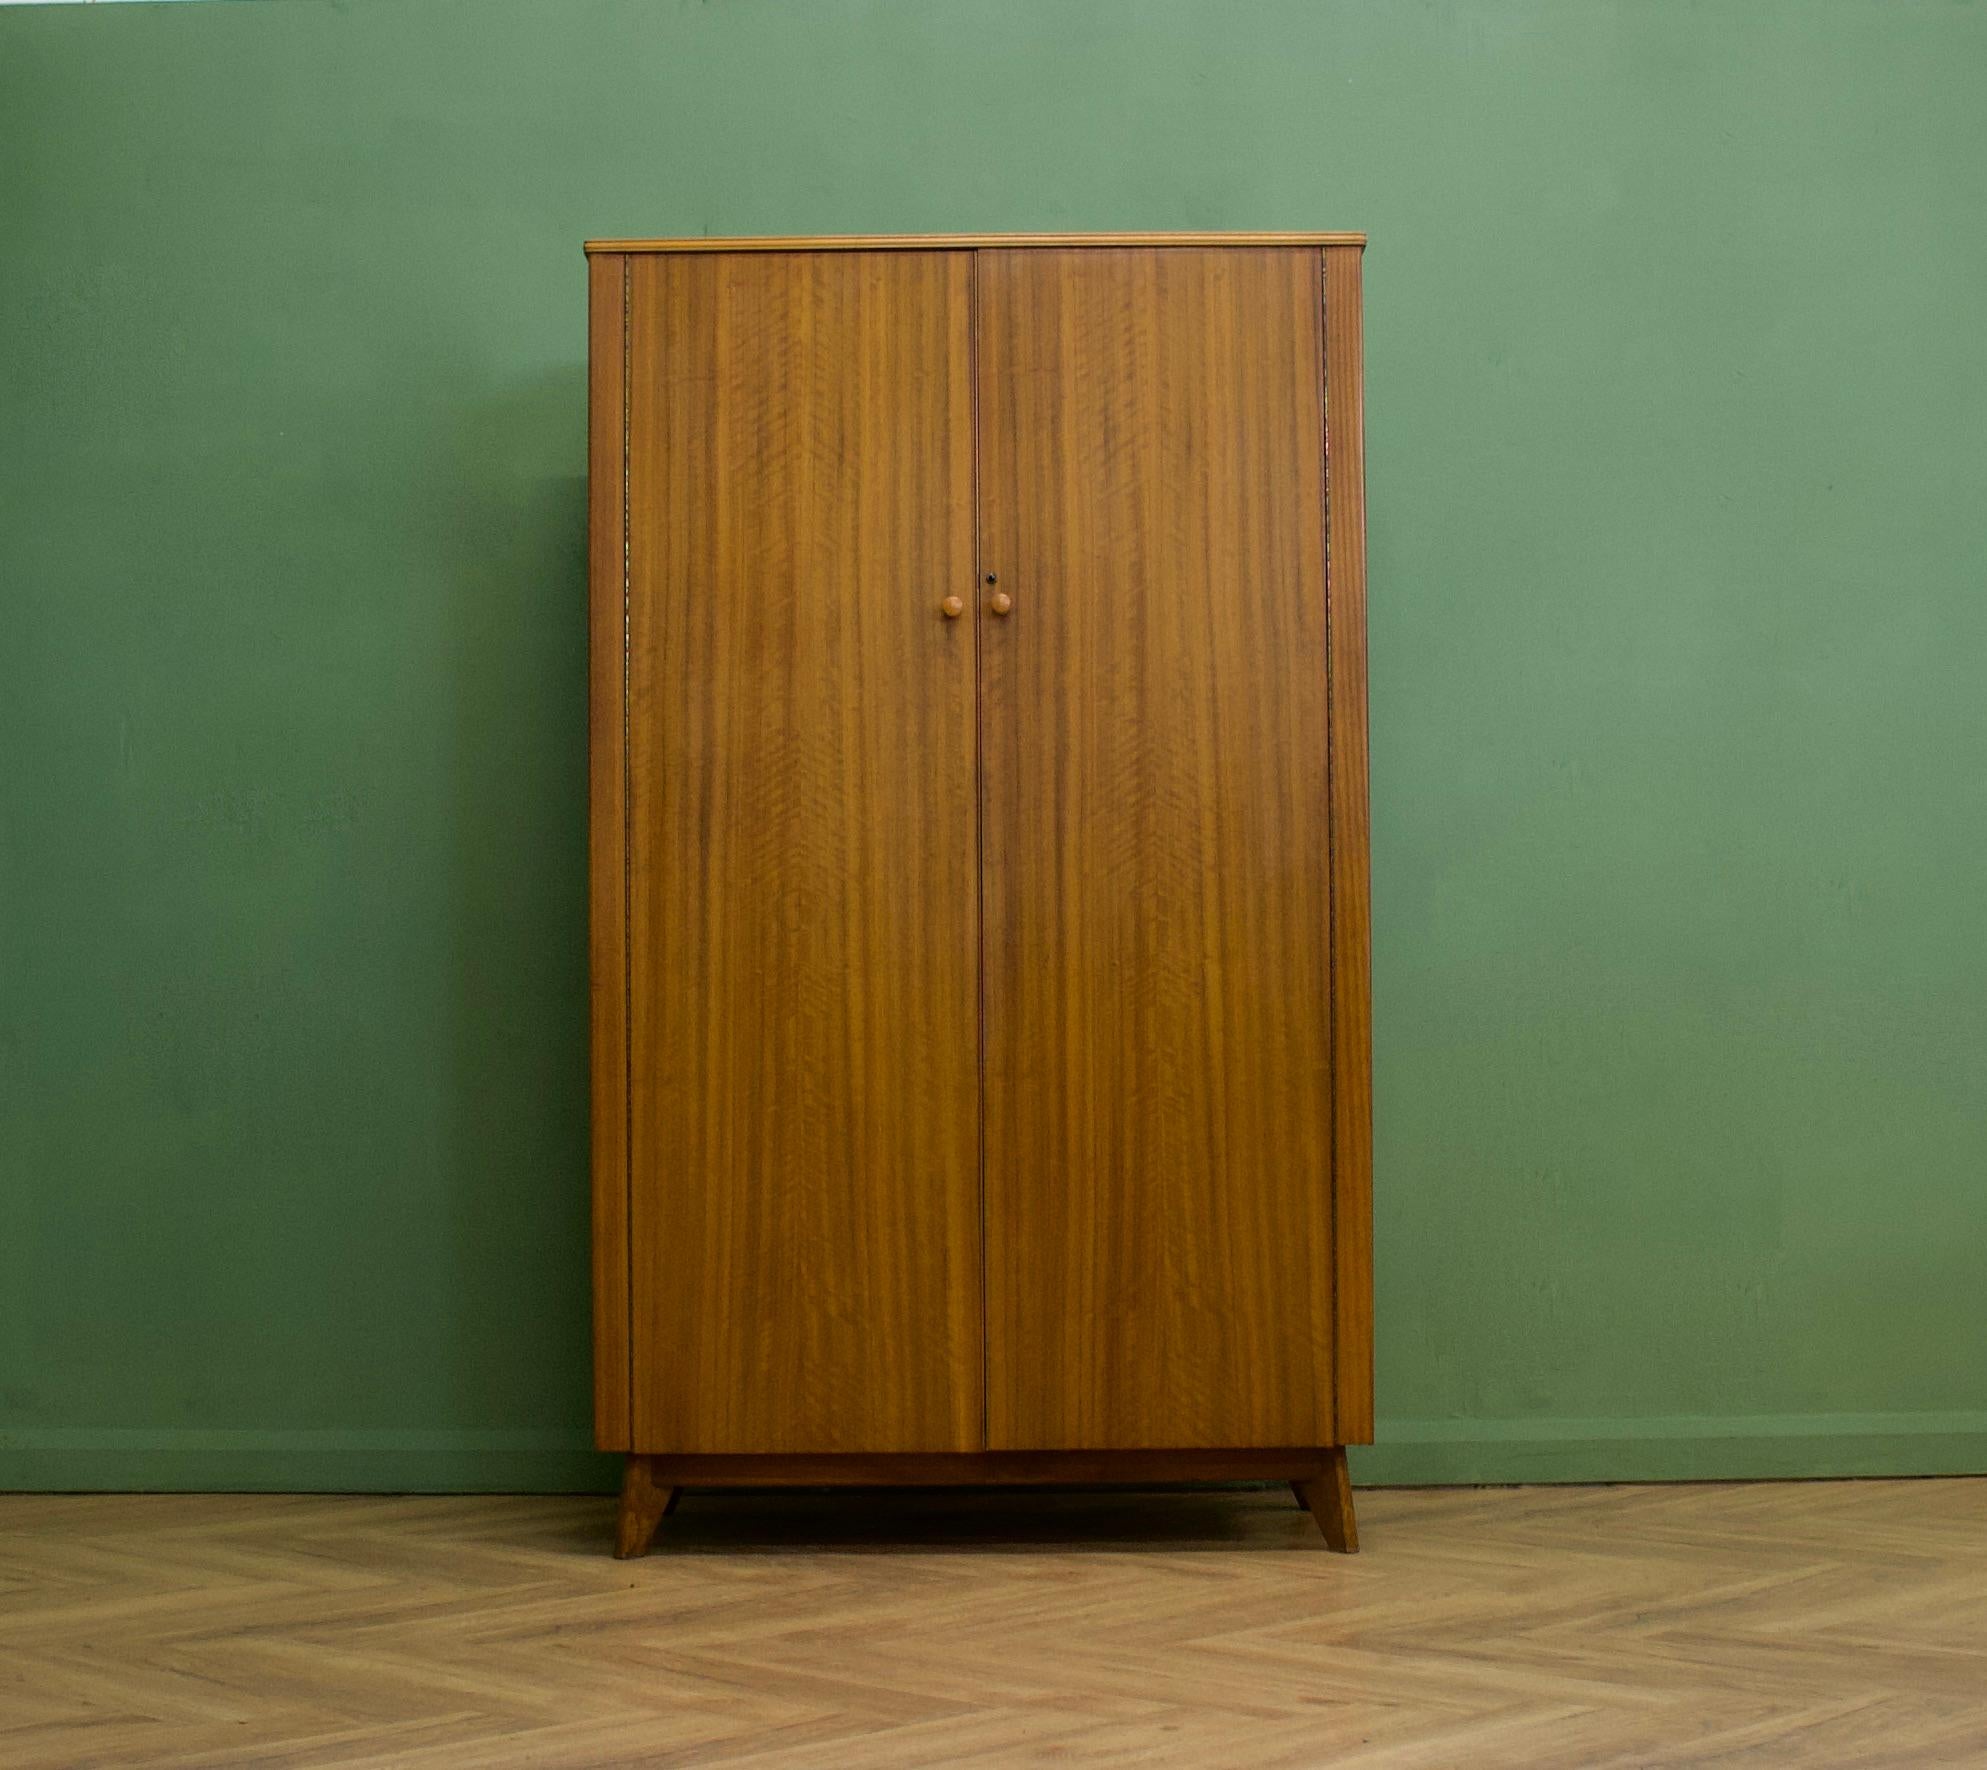 A walnut freestanding wardrobe by Morris of Glasgow - circa 1950s
Internally there is a rail and a shelves
The attractive legs are slightly tapered and splayed, complete with a working push to open latch